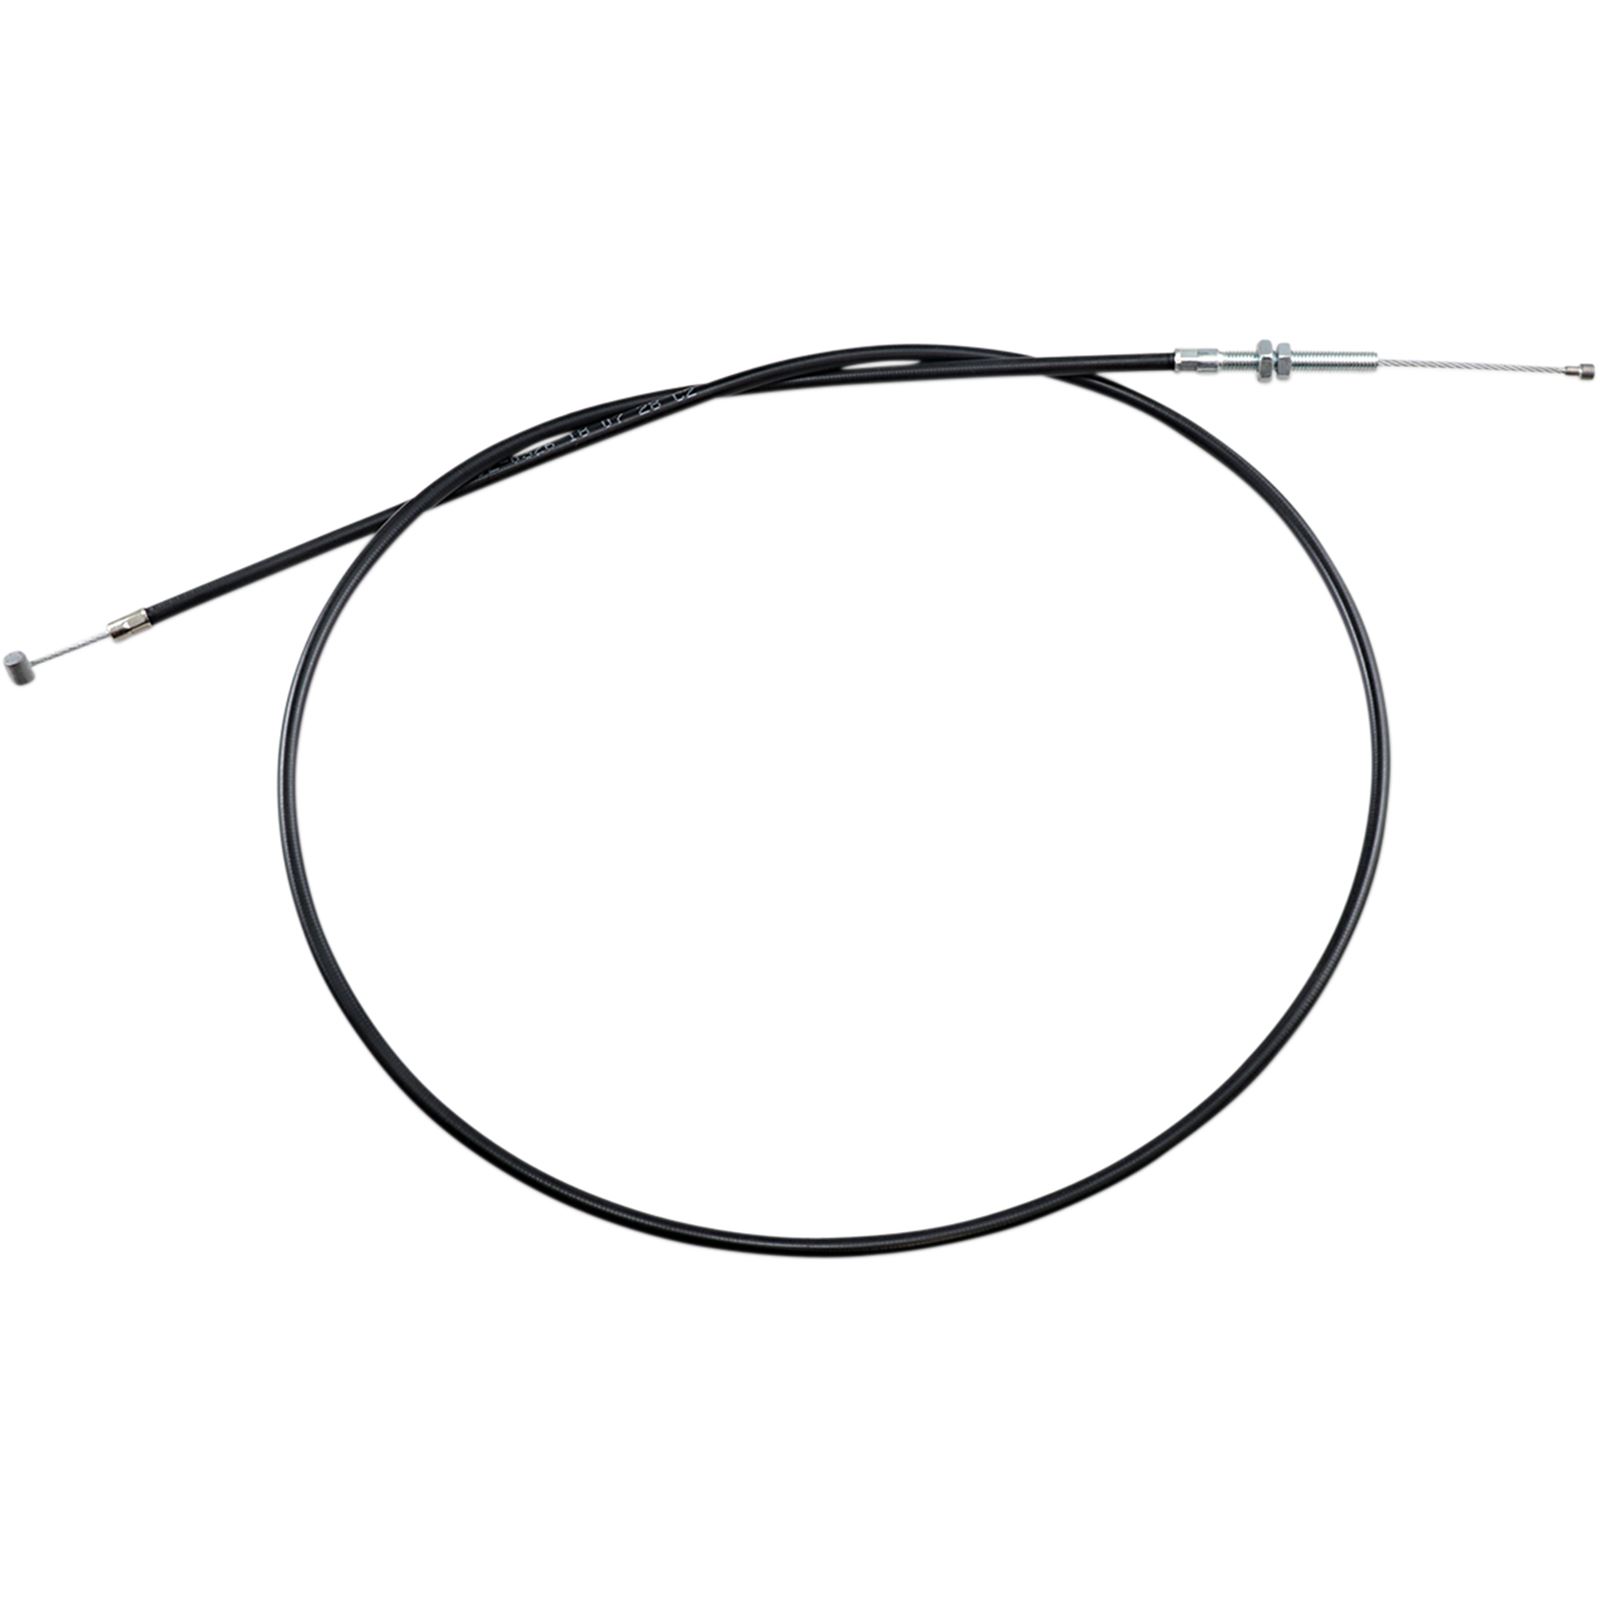 Motion Pro Extended 6" Black Vinyl Clutch Cable for Honda 02-0326